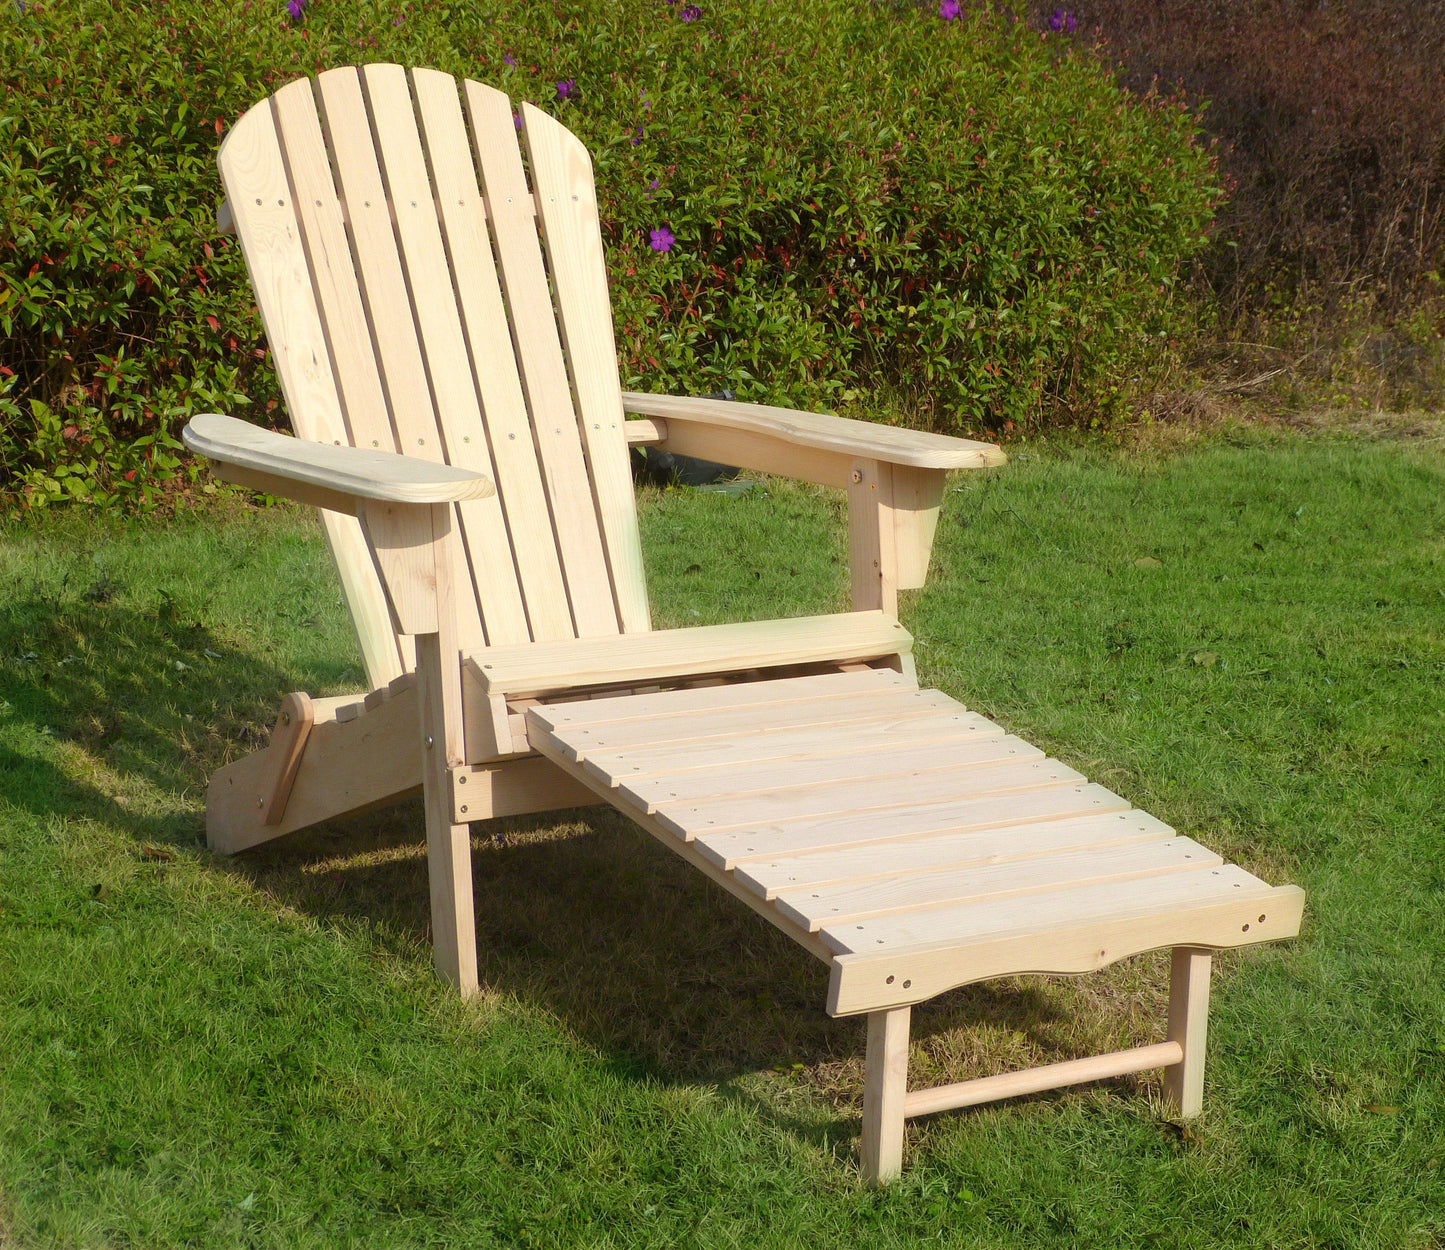 Wooden Unfinished Adirondack Chair Kit With Pullout Ottoman, Chair - Yardify.com